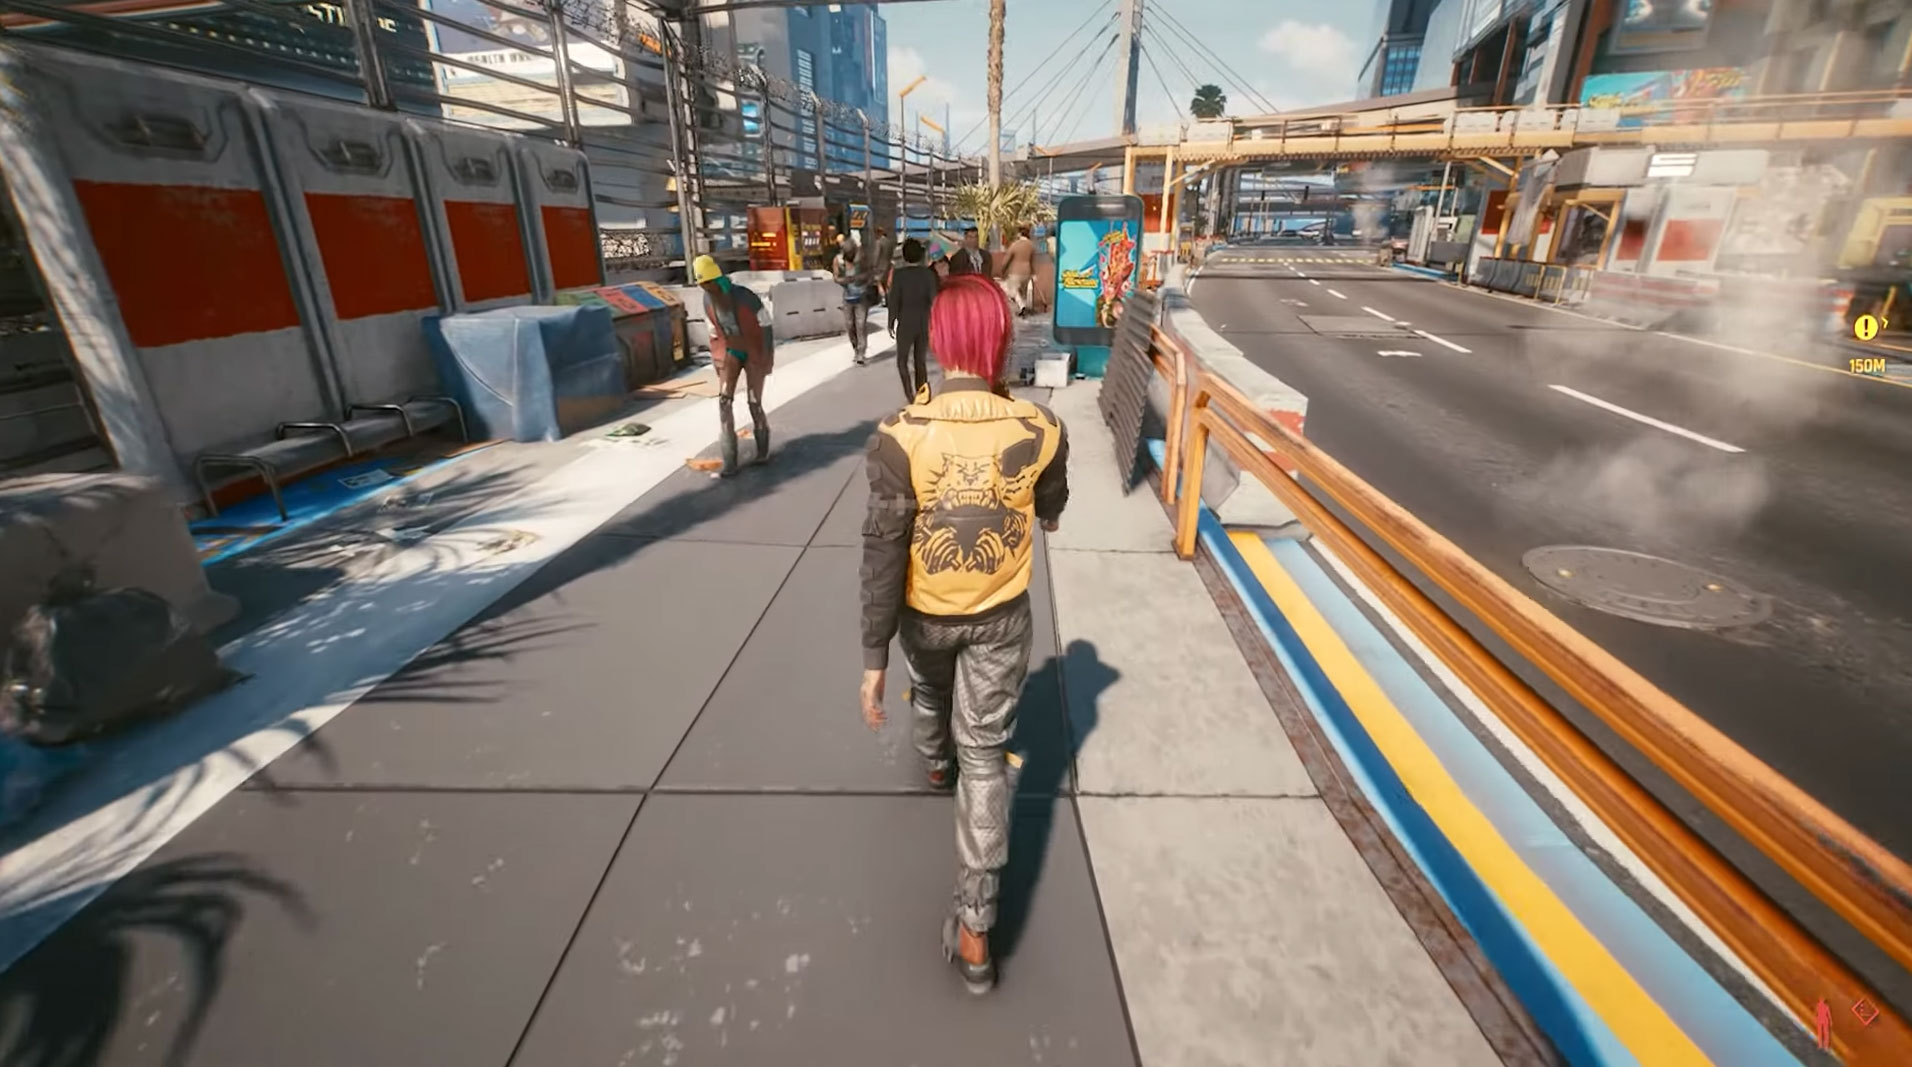 Cyberpunk 2077 Mod Gives Night City An Even More HD Makeover